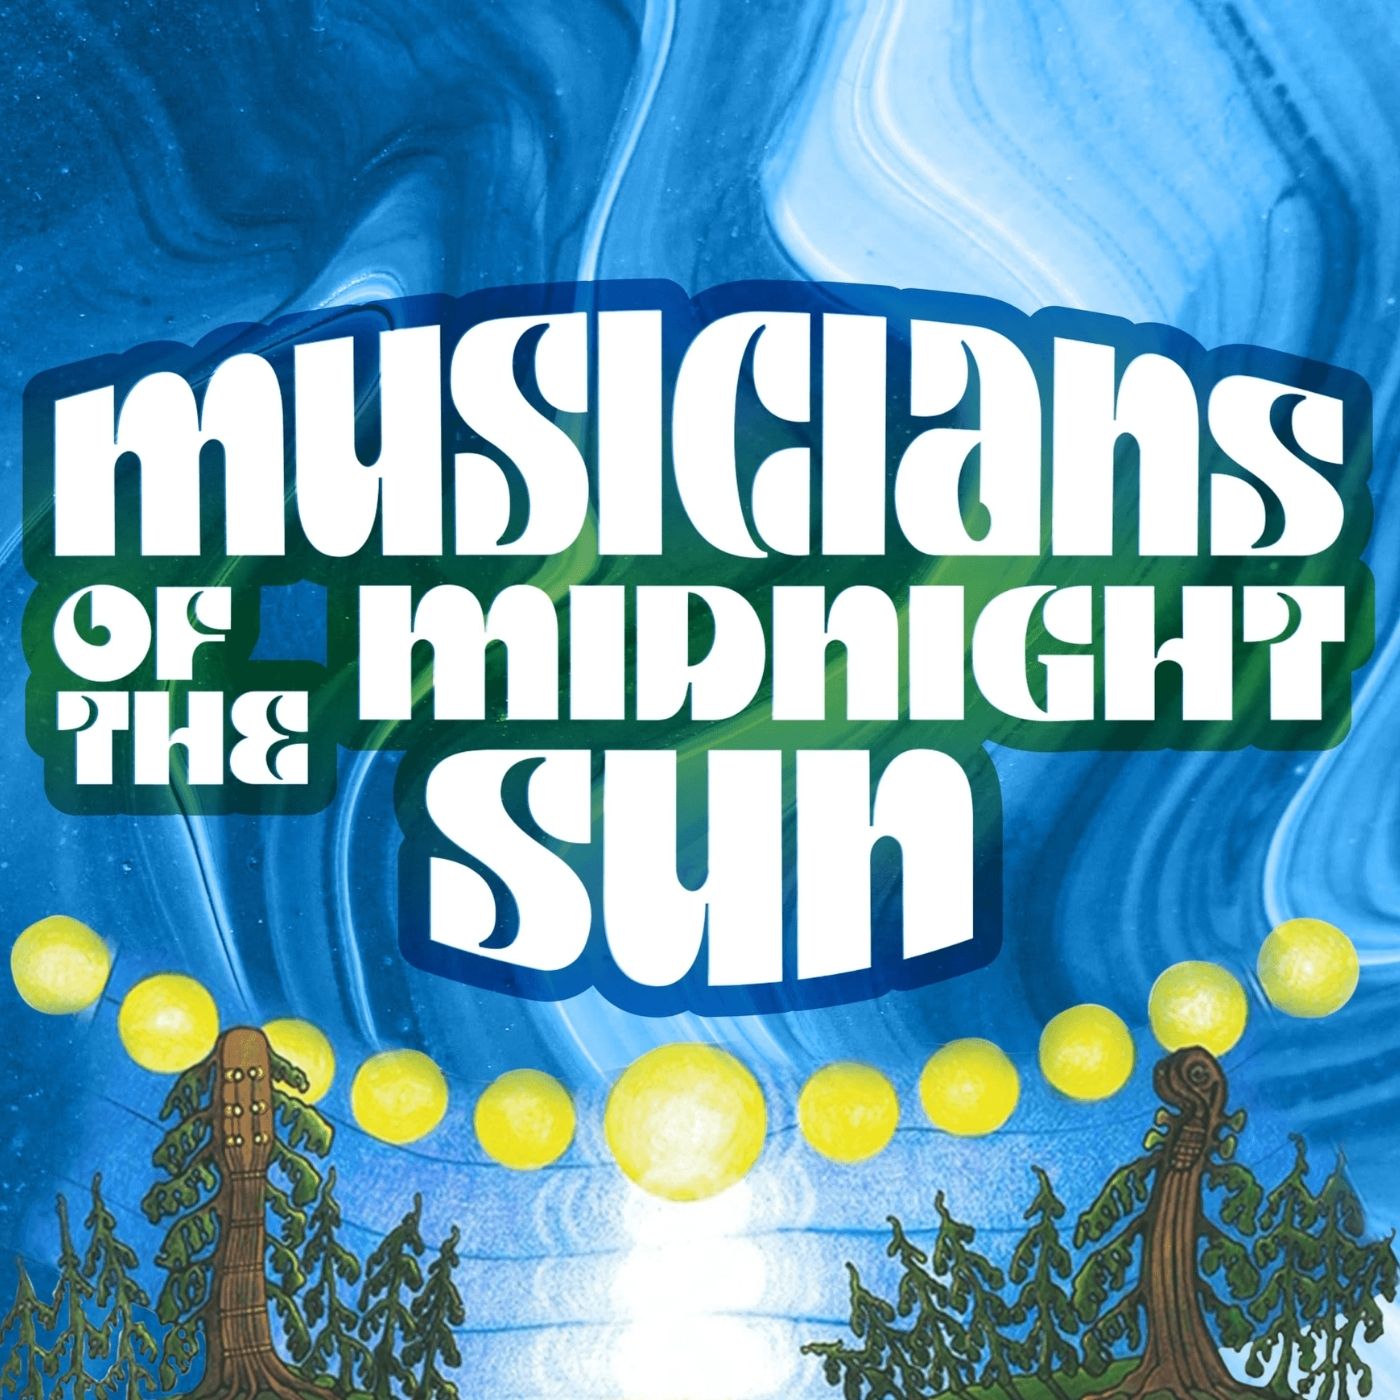 Introducing Musicians of the Midnight Sun